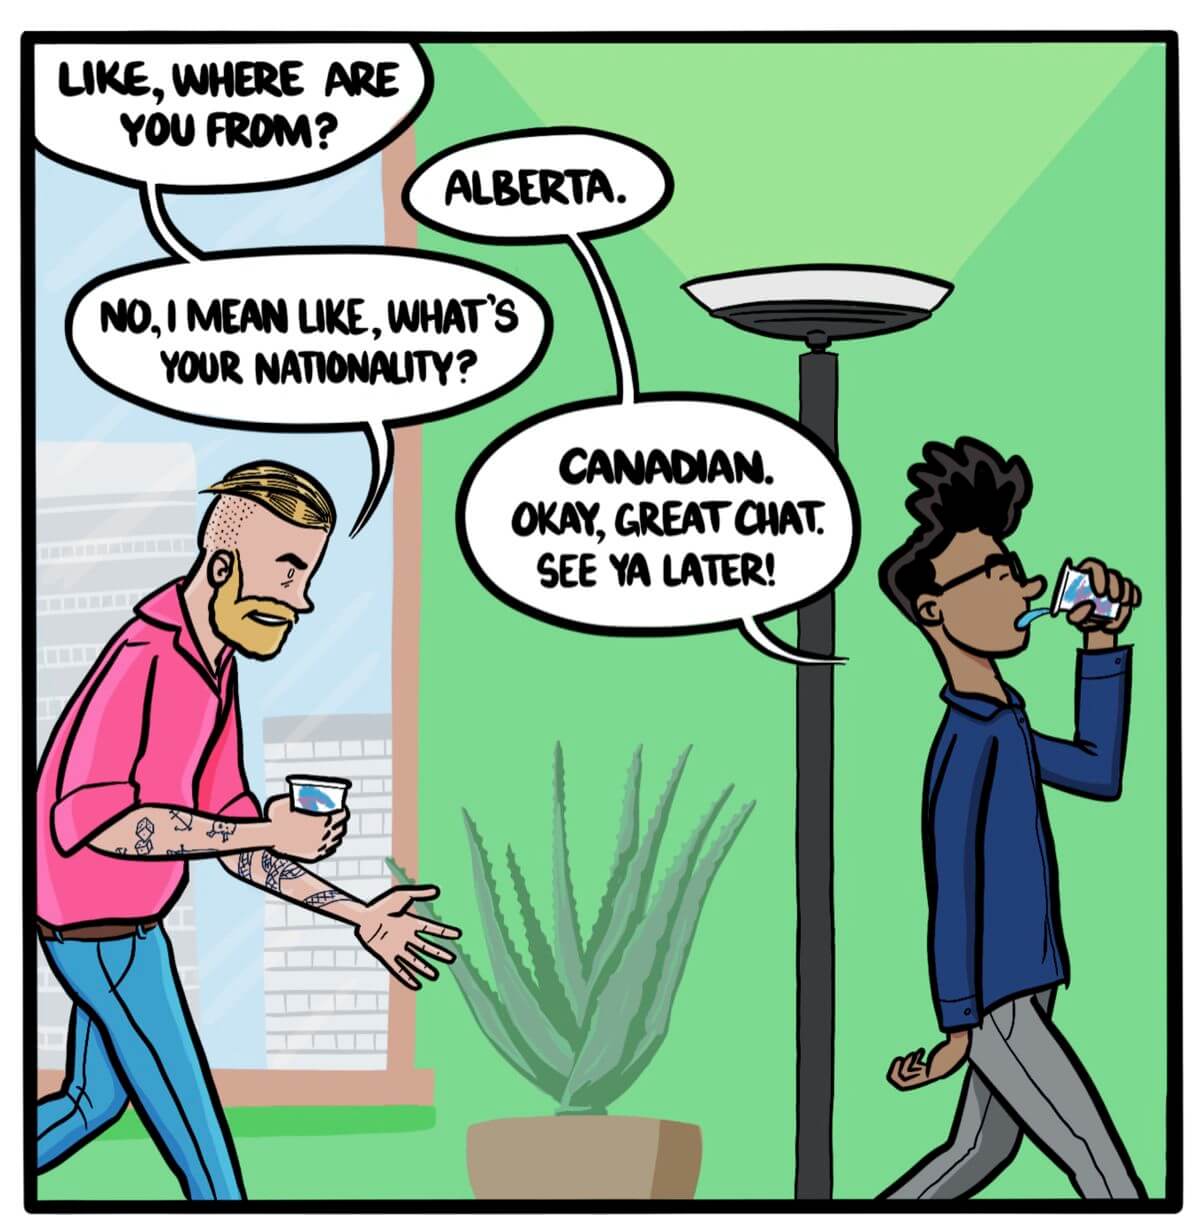 canadian stereotype comics